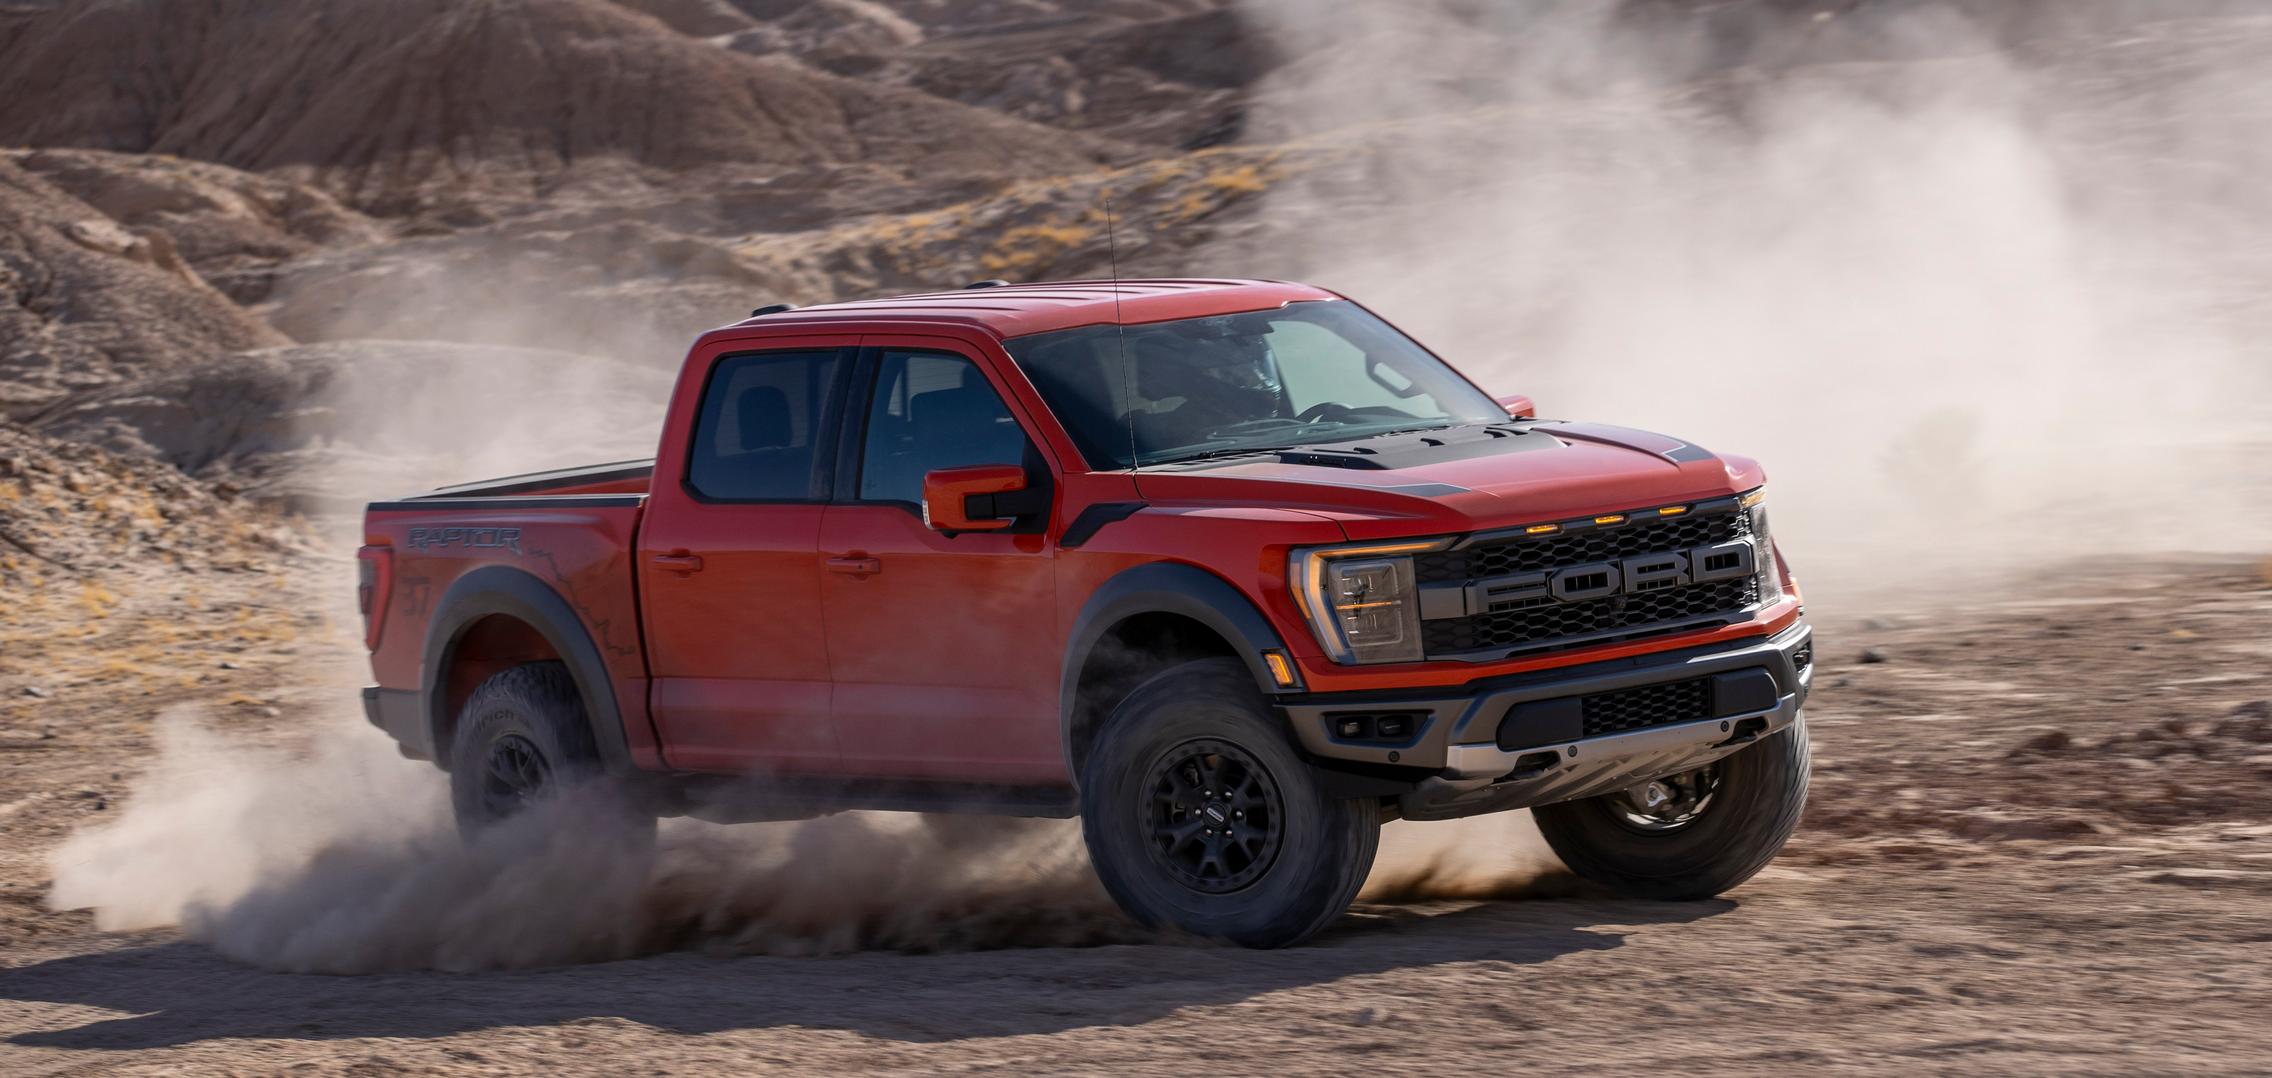 2021 Ford F-150 Raptor Revealed - A V8 is Officially Coming Next Year